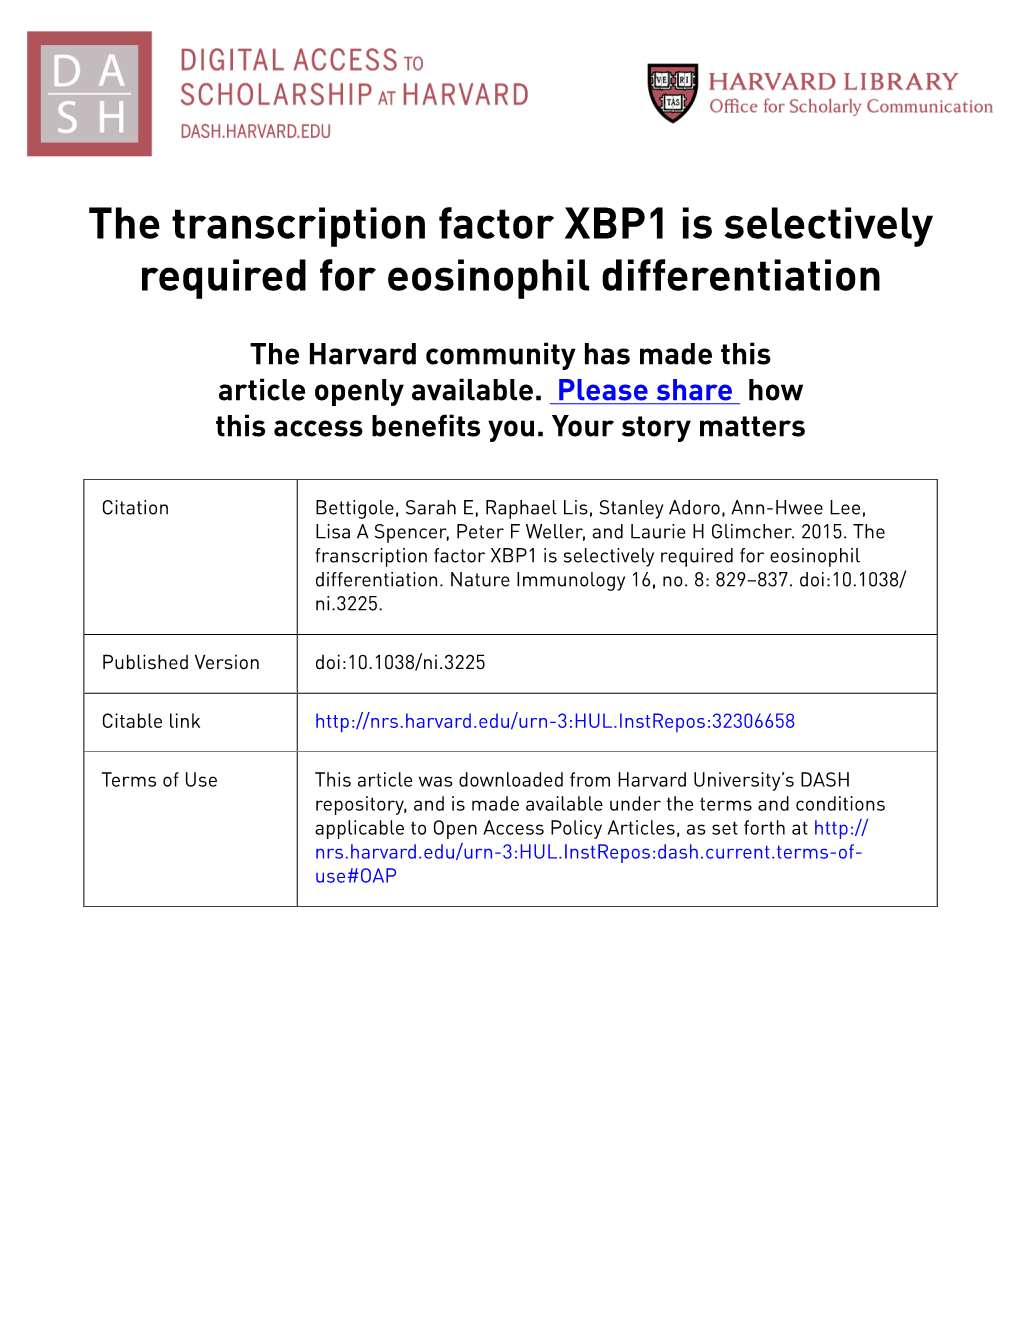 The Transcription Factor XBP1 Is Selectively Required for Eosinophil Differentiation